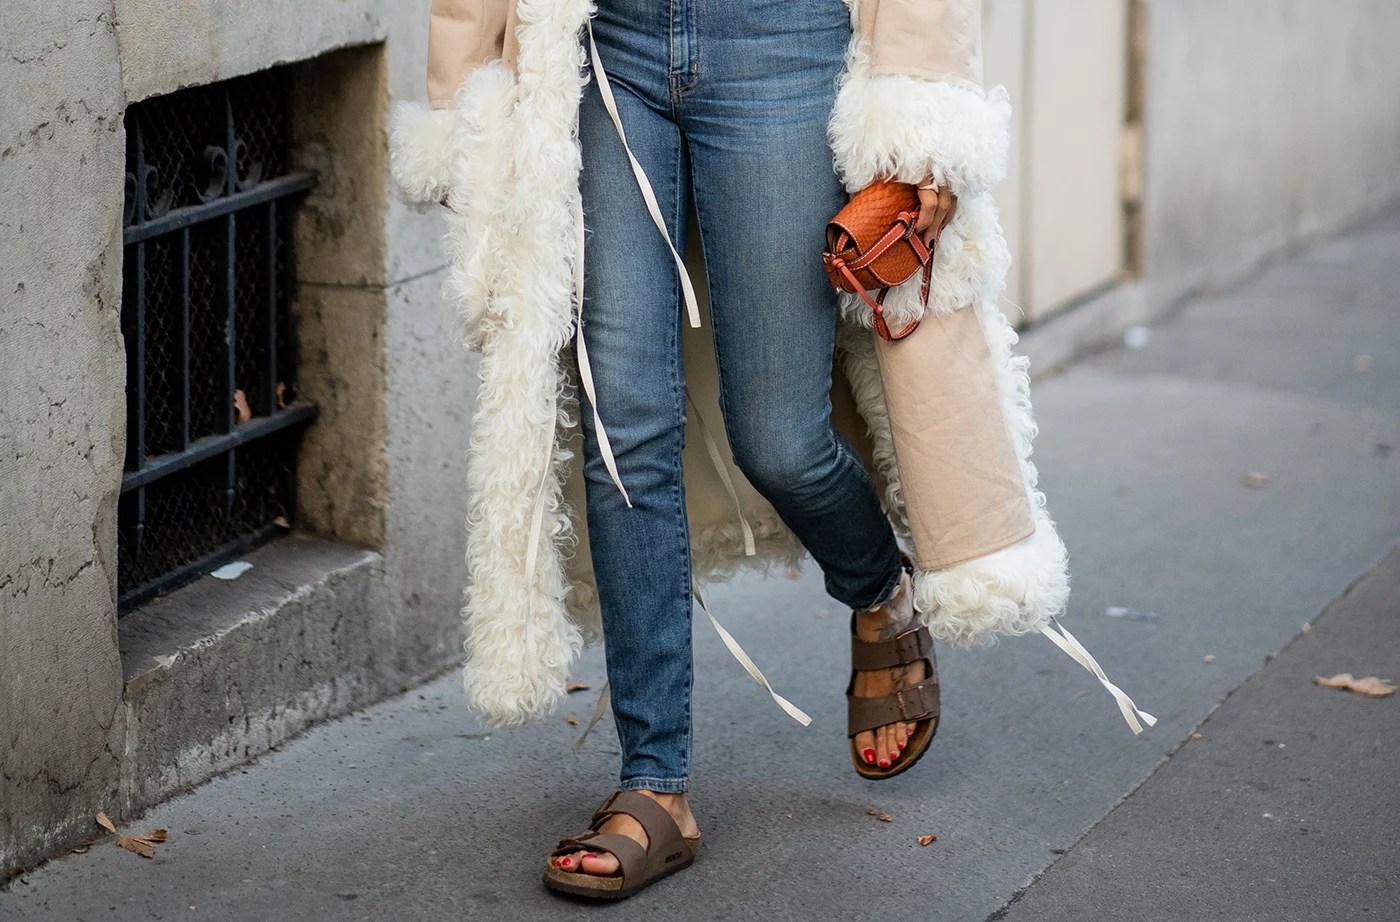 The real reason Birkenstocks will never go out of fashion